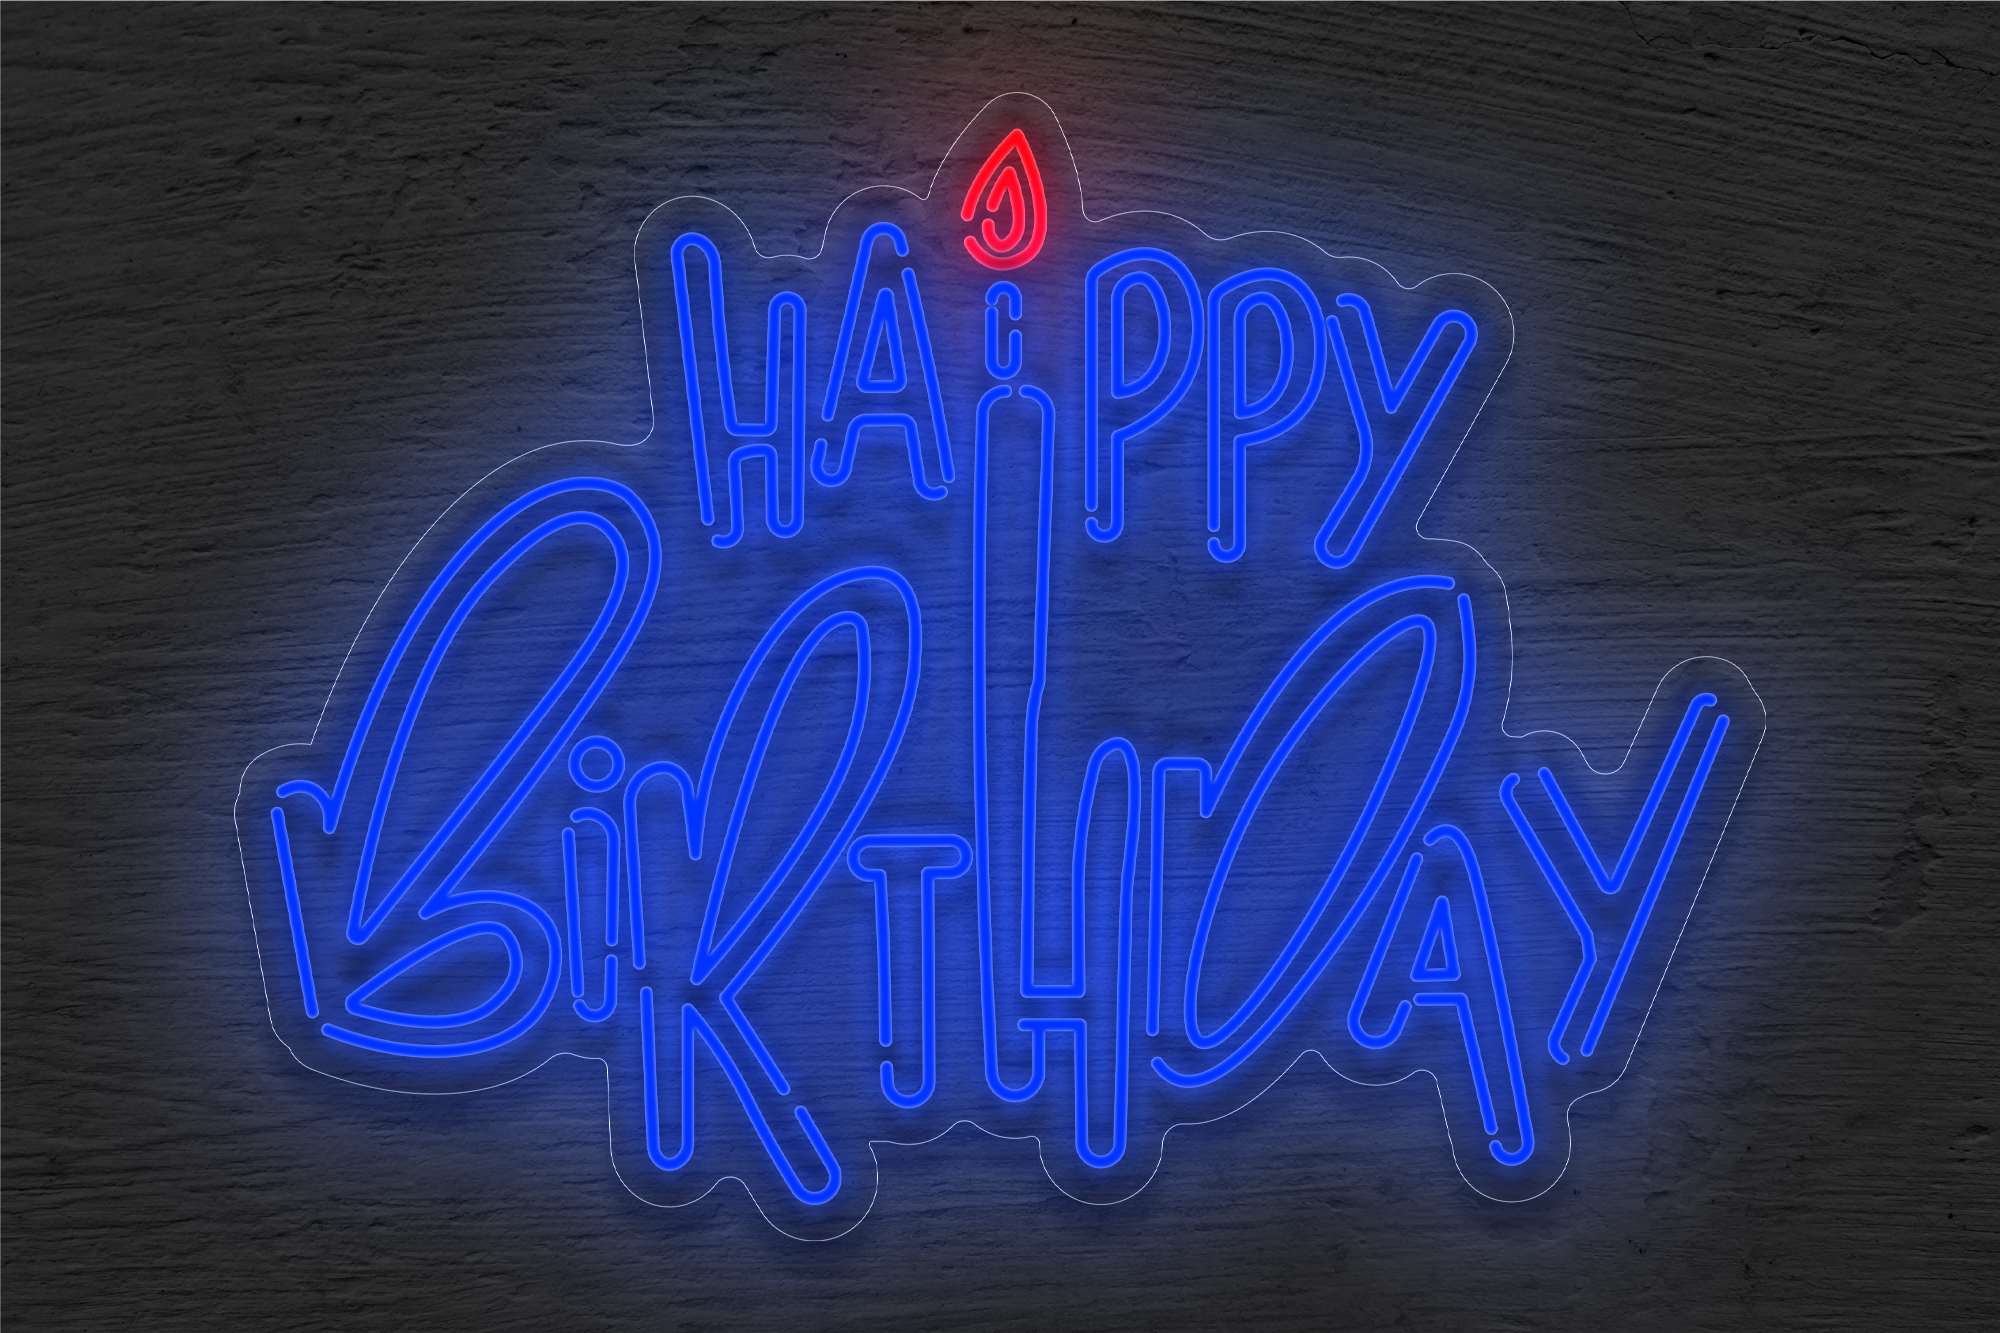 Outlined "Happy Birthday" with Small Fire LED Neon Sign